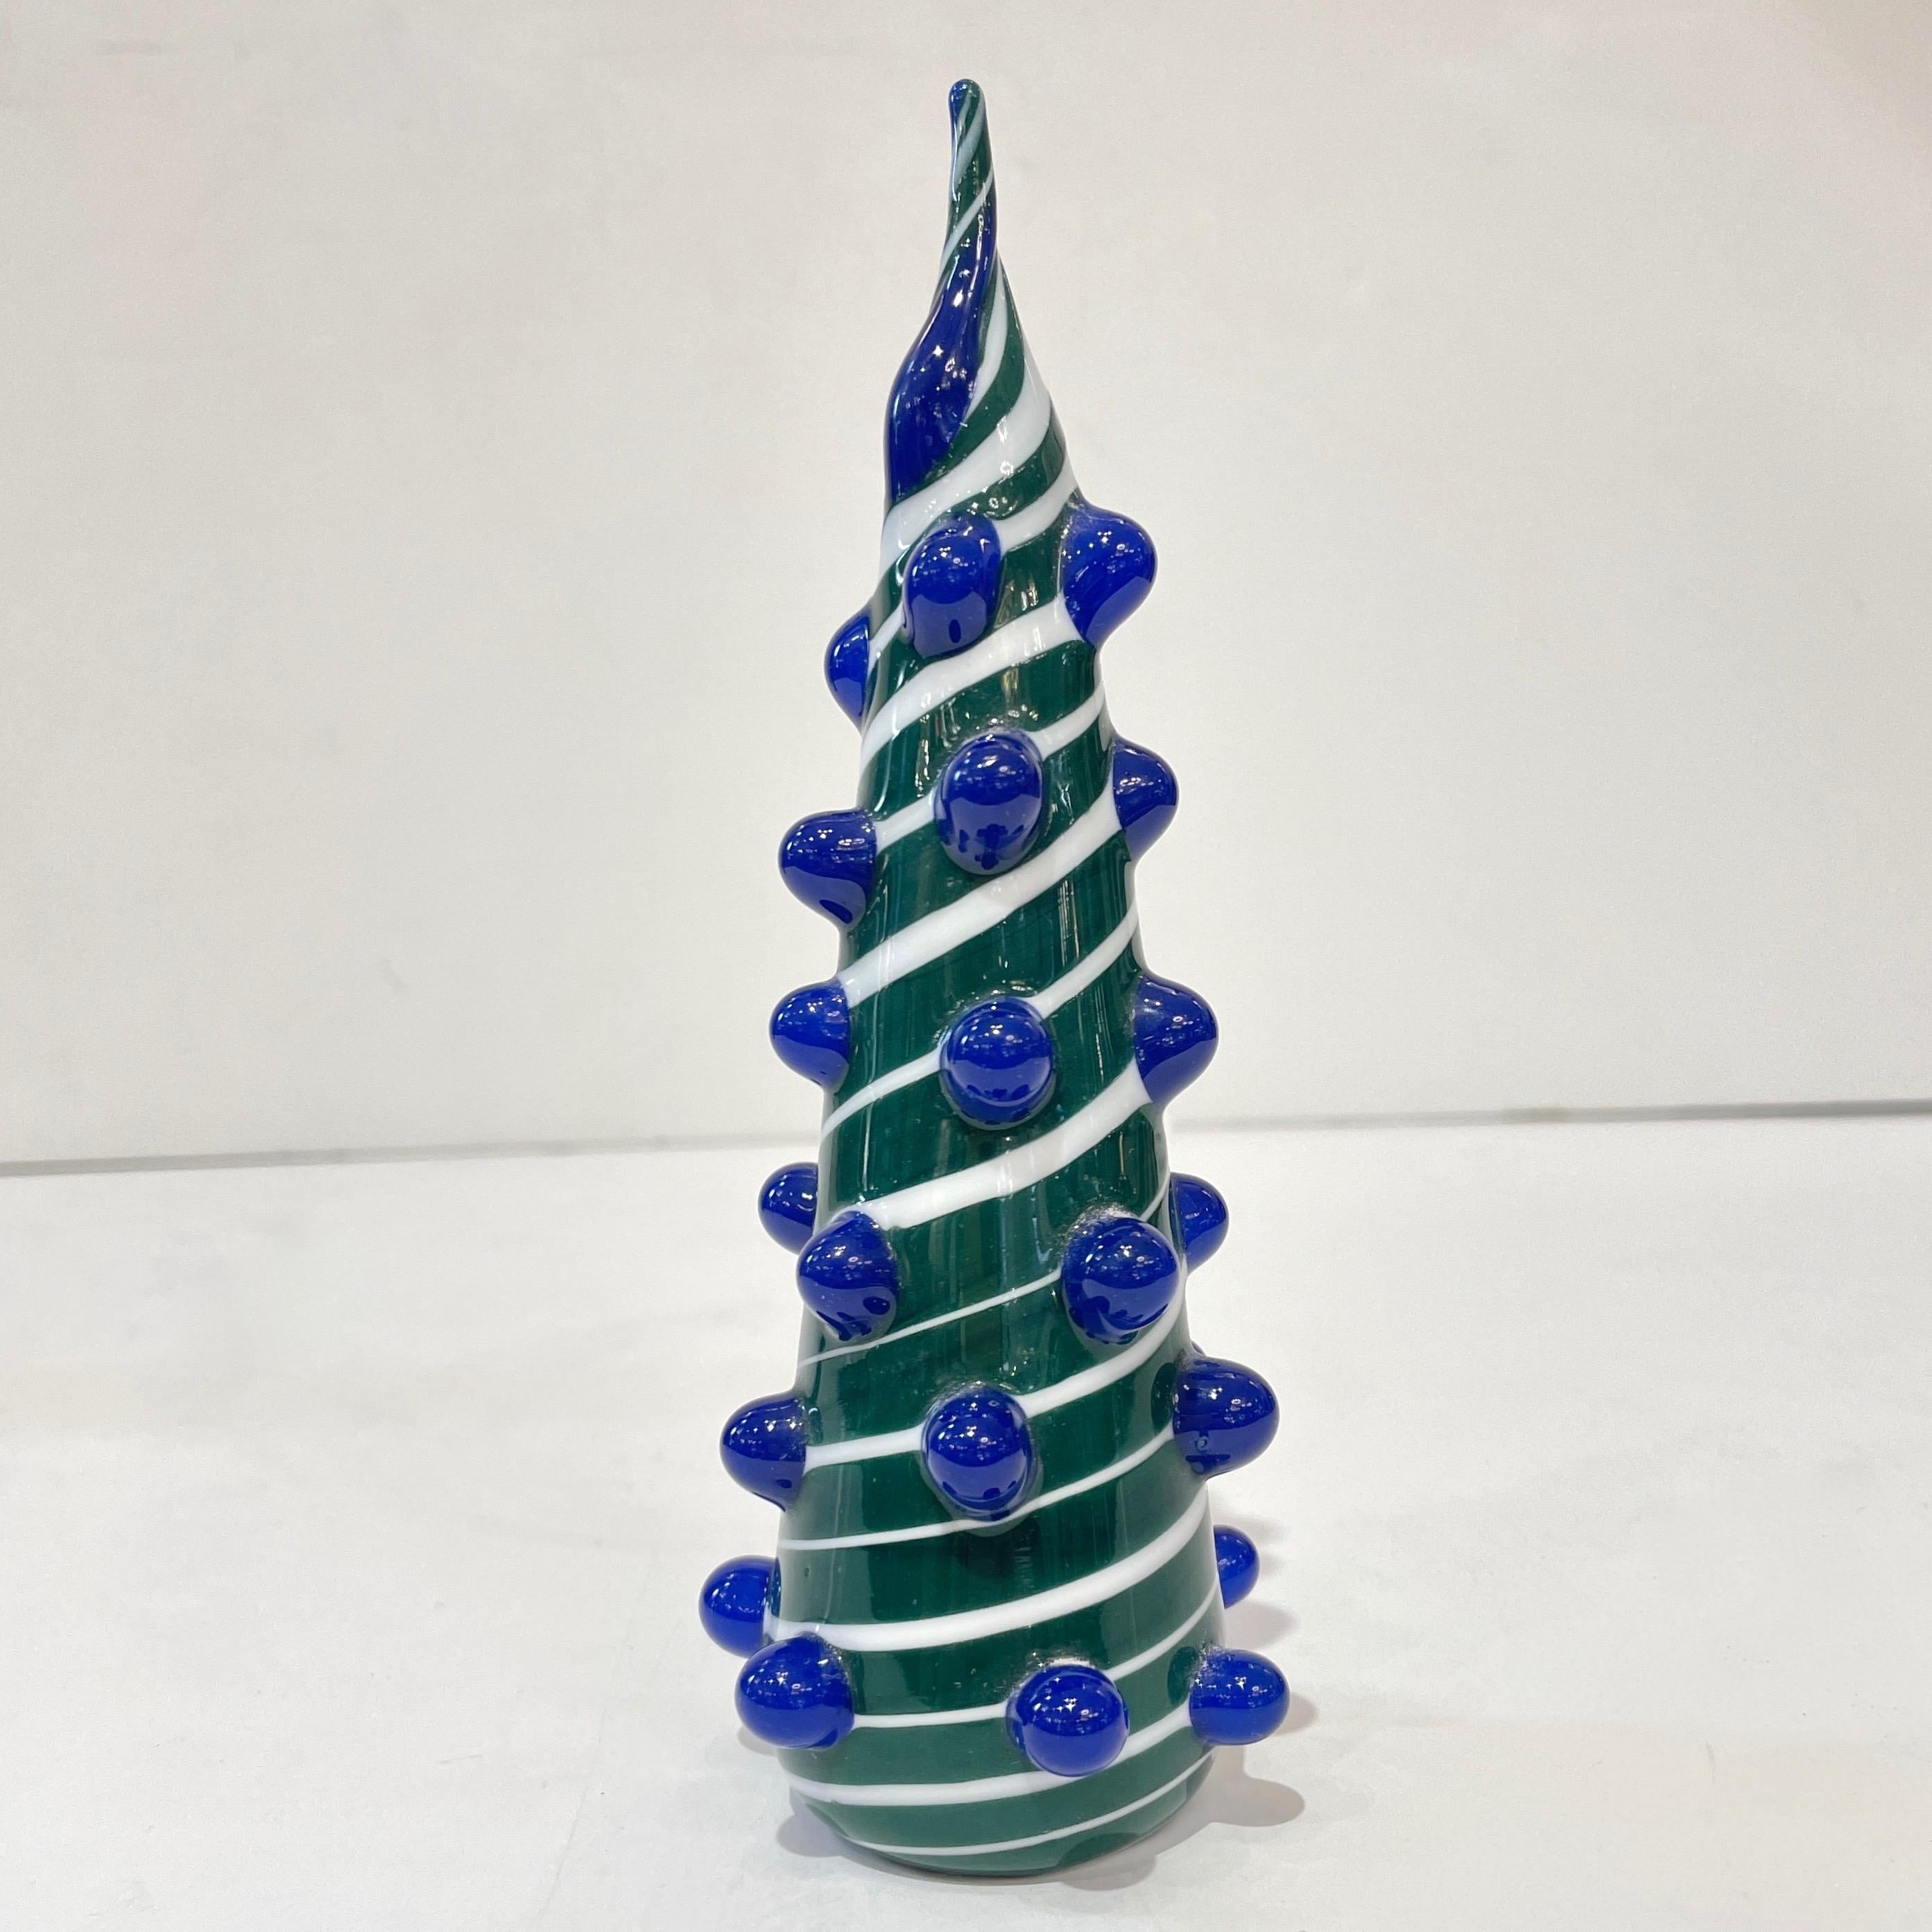 Modern Murano glass tree of minimalist design, a creation labeled Galliano Ferro Murano, individually mouth-blown and handcrafted, part of a collection assembled by Cosulich Interiors & Antiques. The solid cone in pine green Murano glass is blown